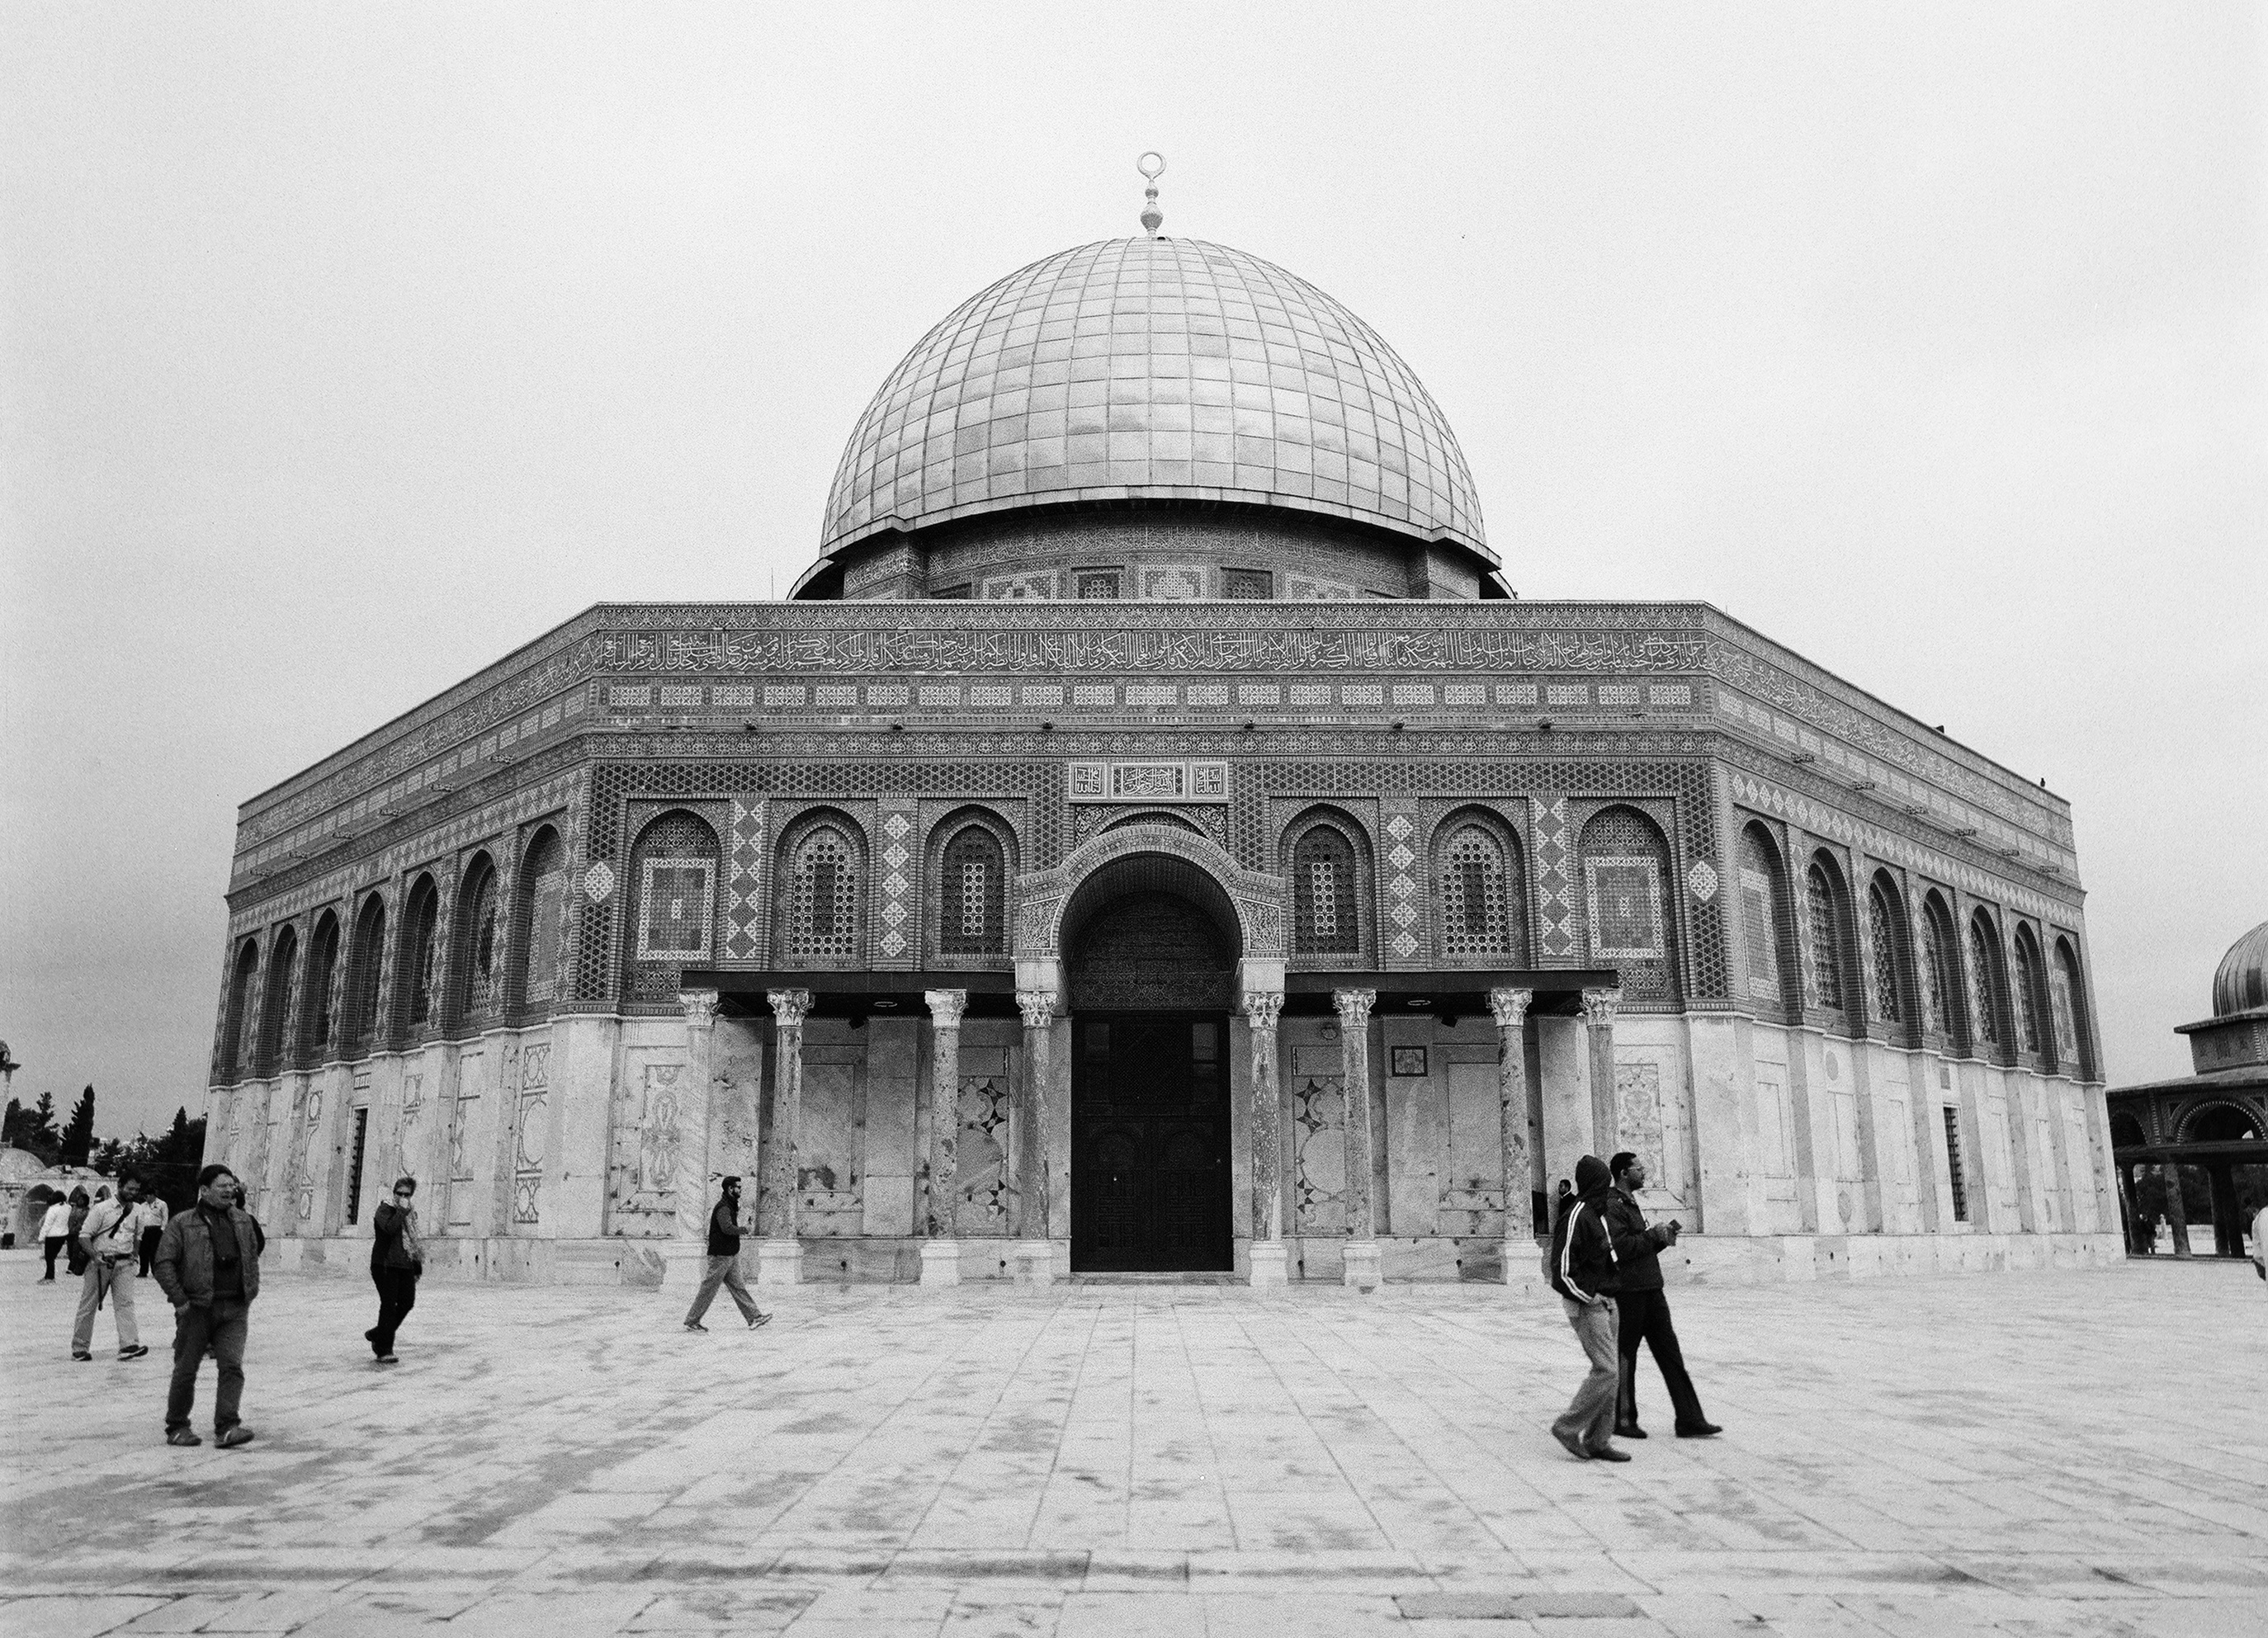 Dome of the Rock on Temple Mount, Jerusalem, Israel.